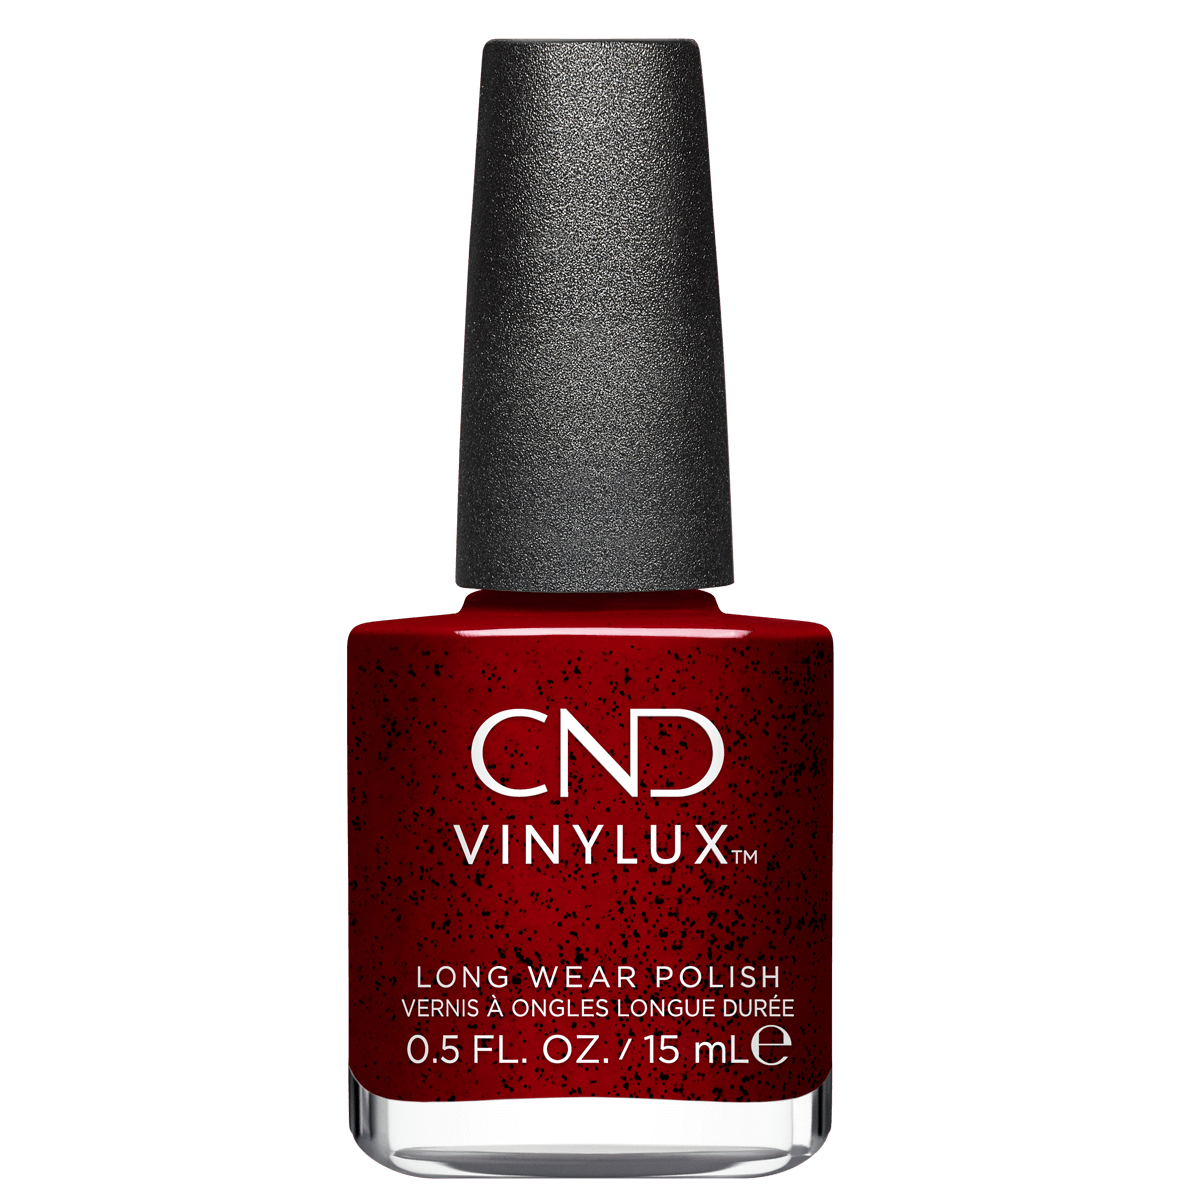 Vinylux CND Vernis à Ongles #453 Needles & Red 15mL